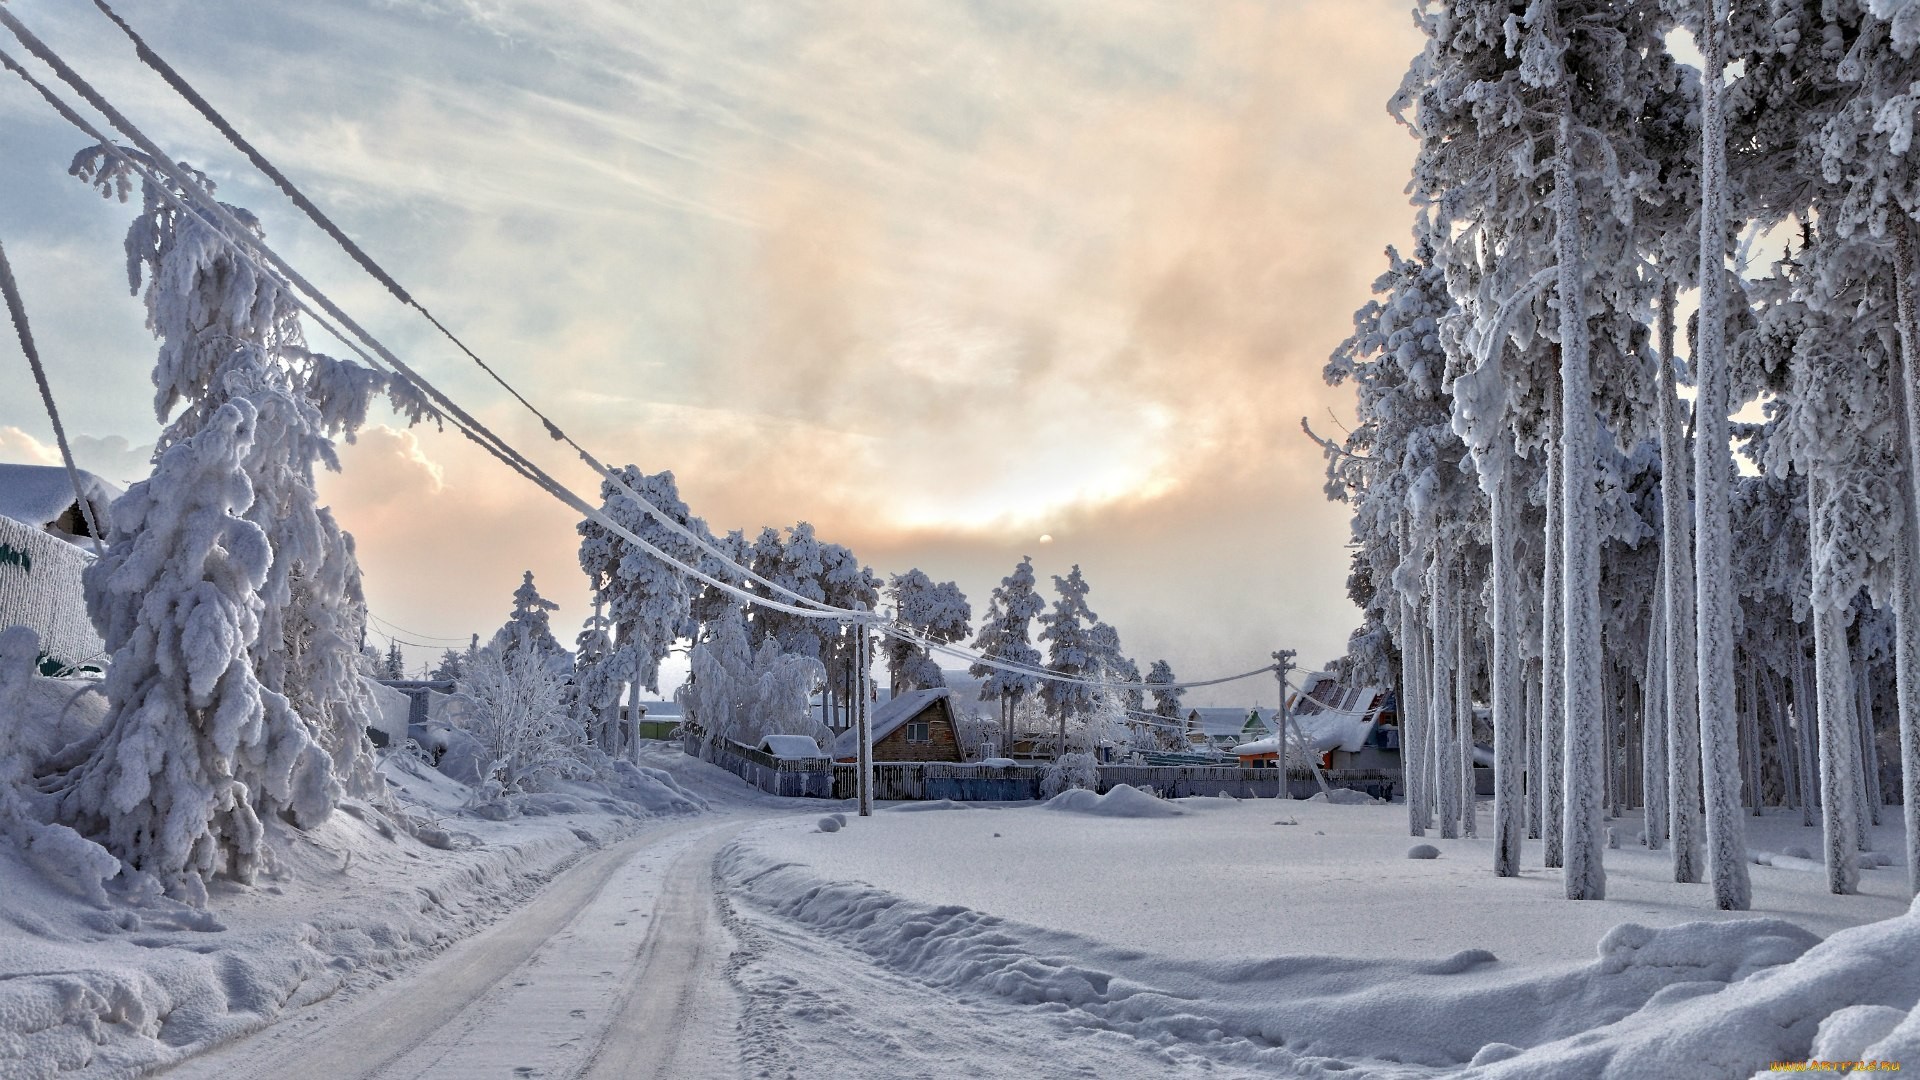 General 1920x1080 winter snow trees house power lines ice cold road clouds sunlight